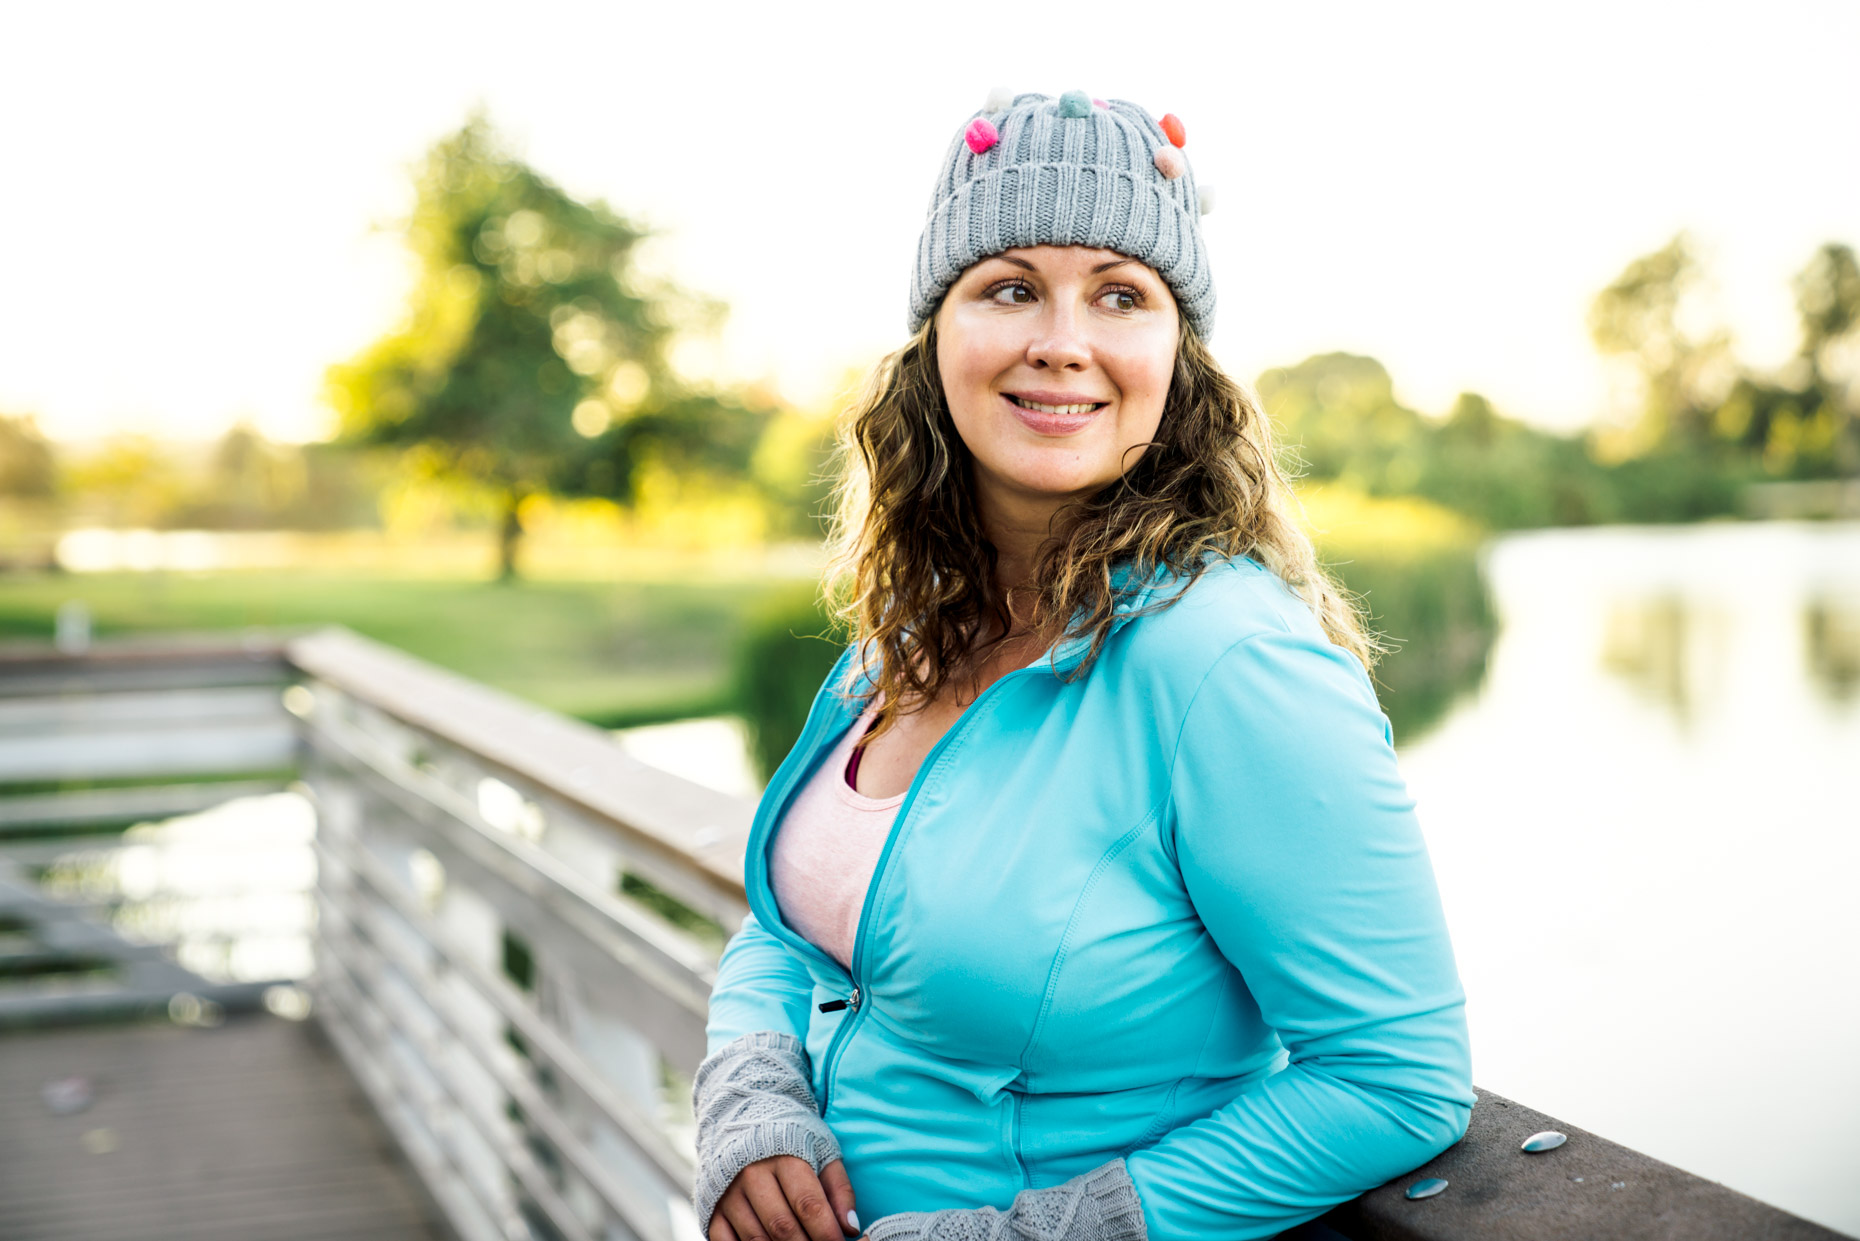 Plus-sized woman in fitness attire and hat standing on bridge smiling 